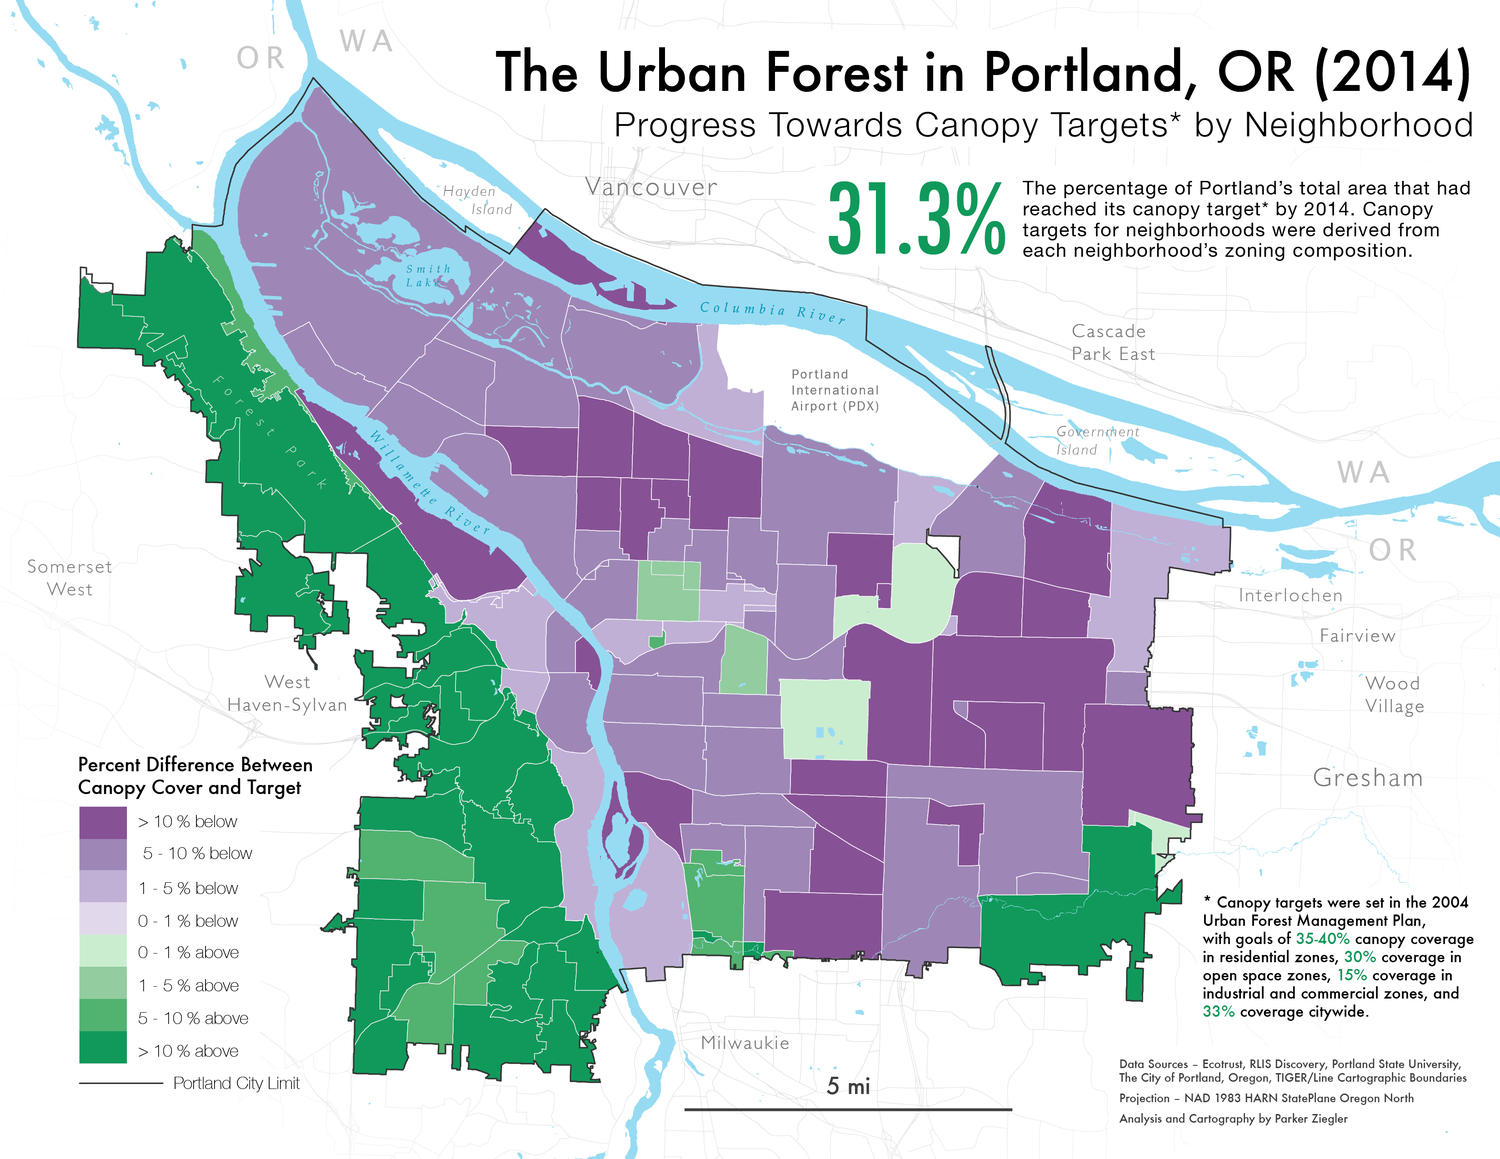 A map of Portland's urban canopy cover compared to city targets by neighborhood in 2014.